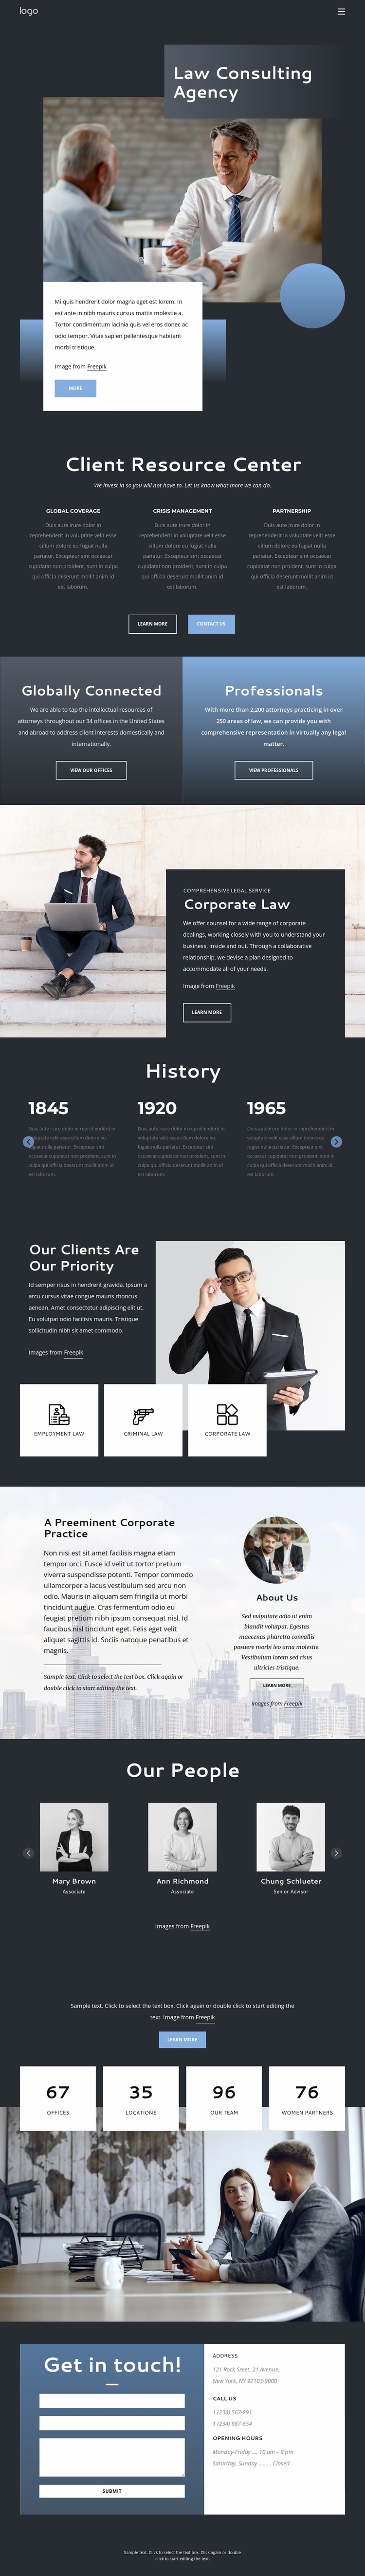 Law consulting agency Landing Page